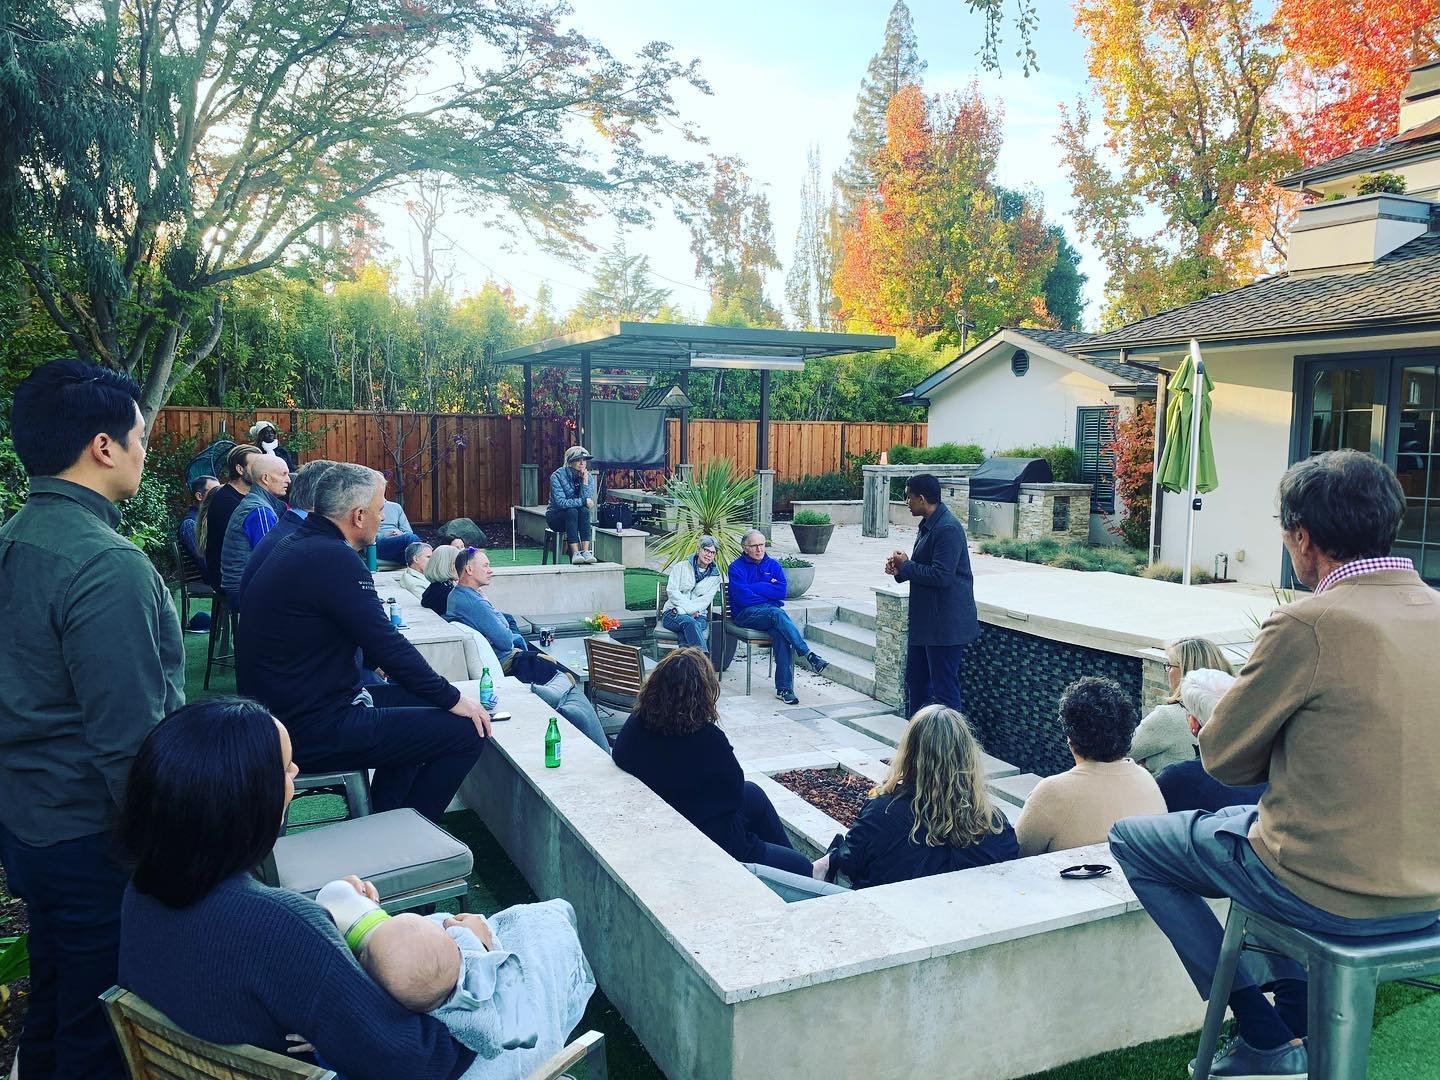 Great meet and greet discussing our democracy, climate change, and the housing affordability crisis. So thankful to our hosts and those who dare to believe.